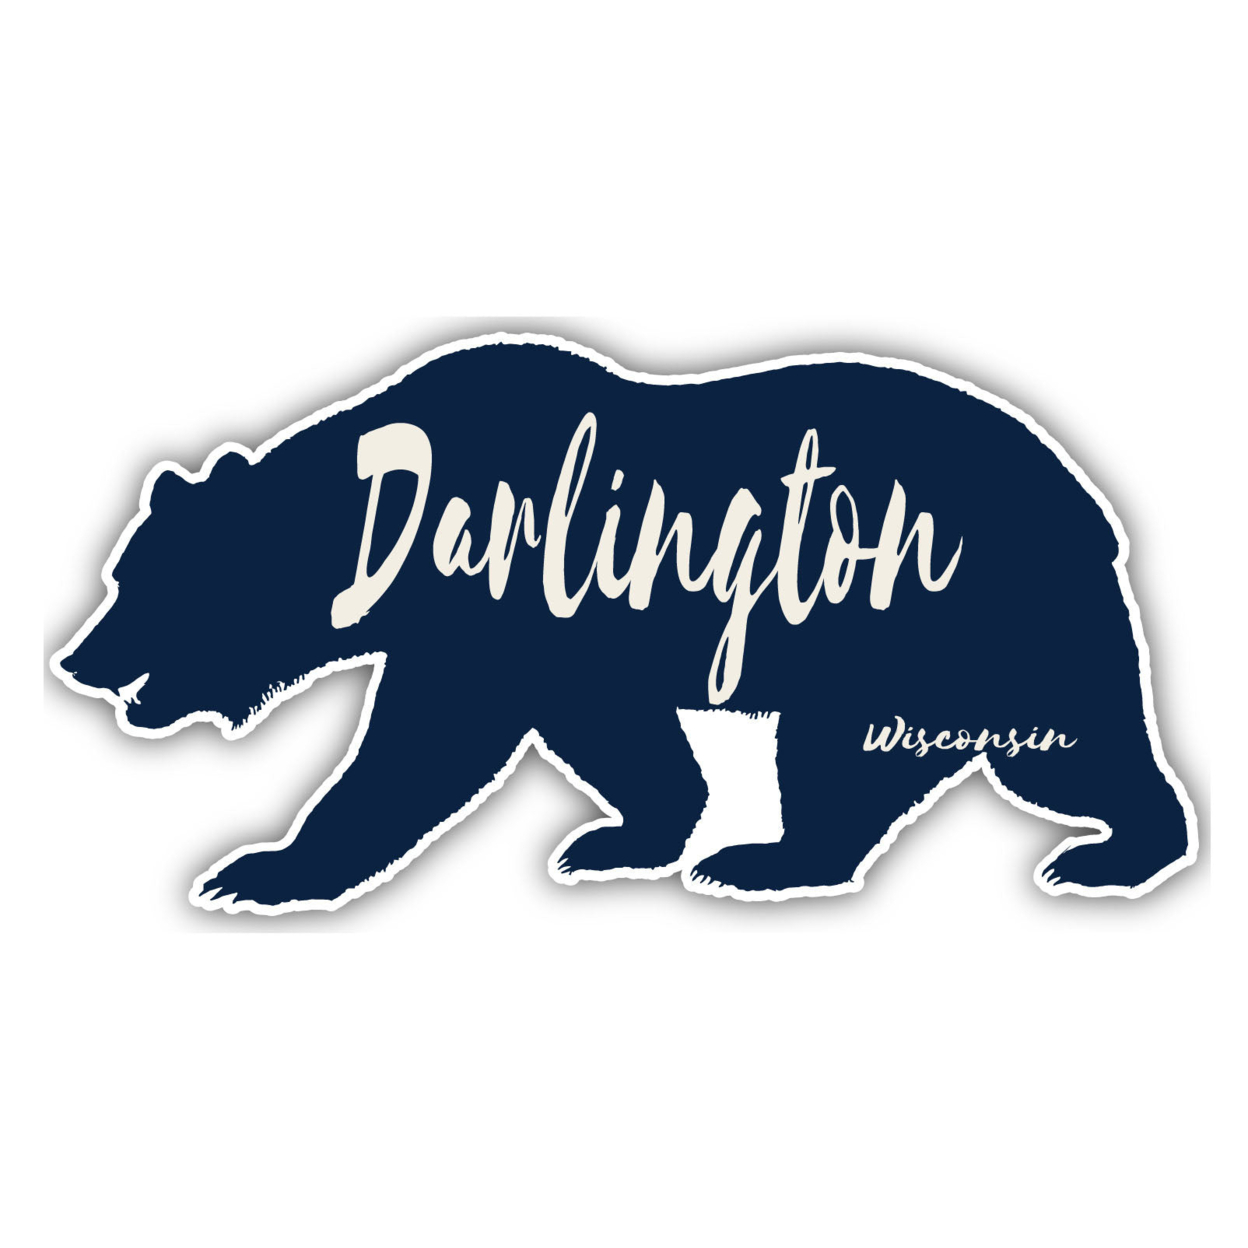 Darlington Wisconsin Souvenir Decorative Stickers (Choose Theme And Size) - 4-Pack, 6-Inch, Bear